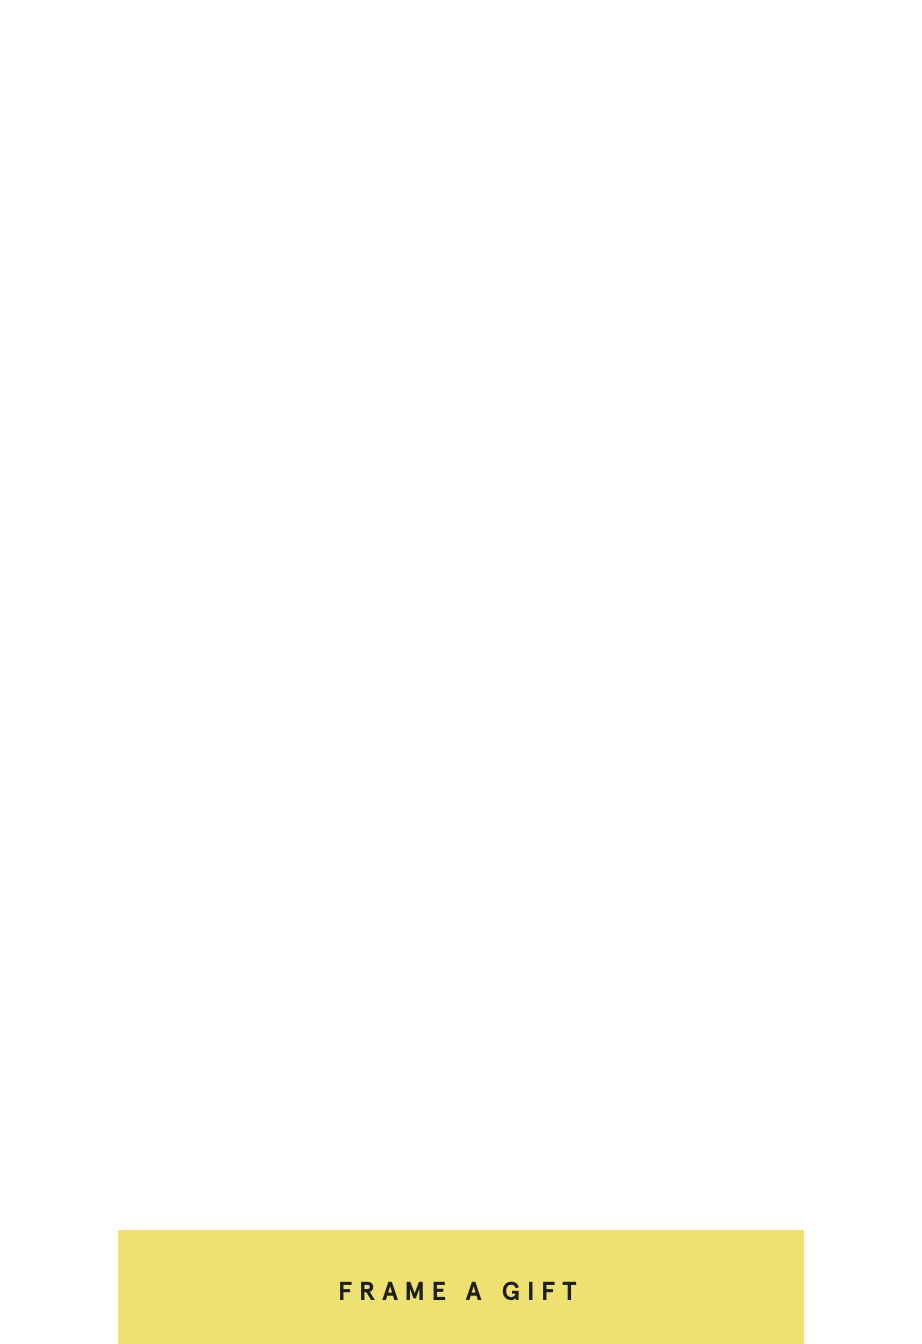 Crackle cookie recipe. Grandma Joan's serenade. Ballet tickets. Paper snowflake. The cousins picture. First dance. Vacation spritzes.